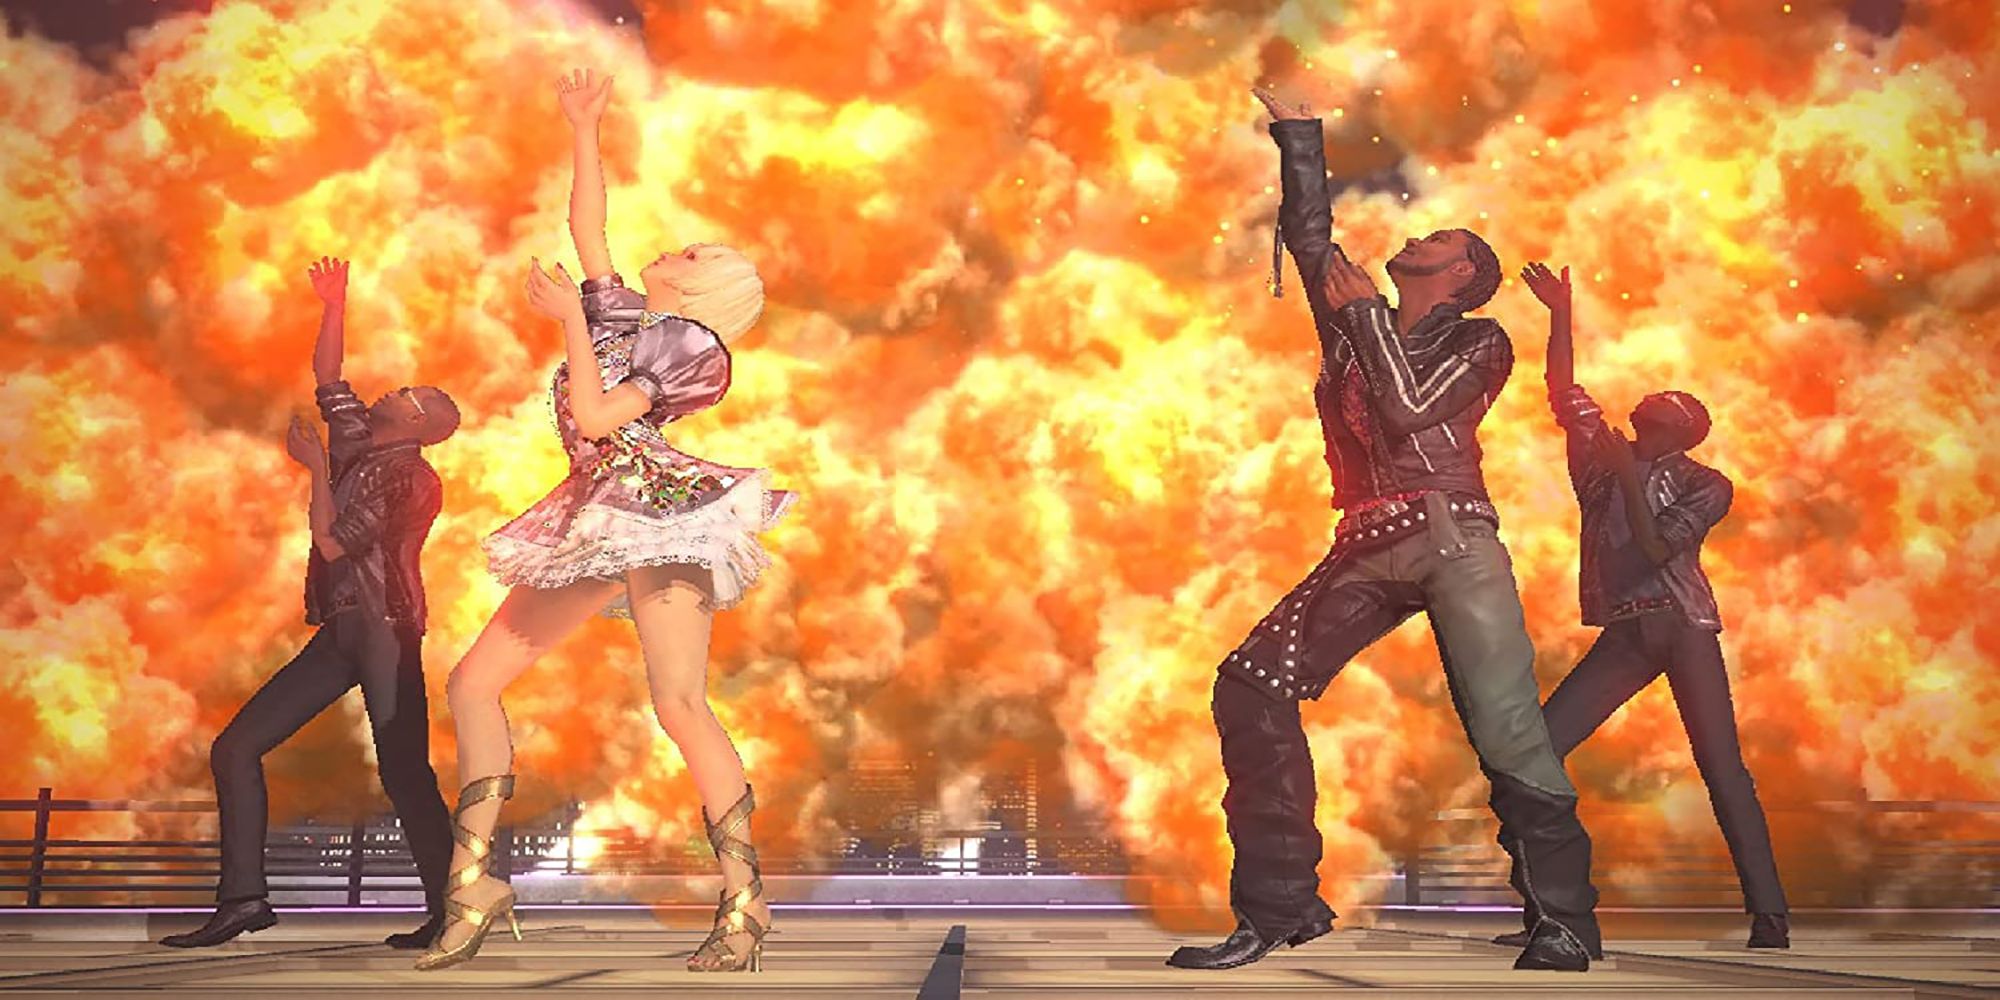 A sparkly-dressed pop idol and her leather-clad rockstar partner dance in front of crazy pyrotechnics in Dance Evolution.